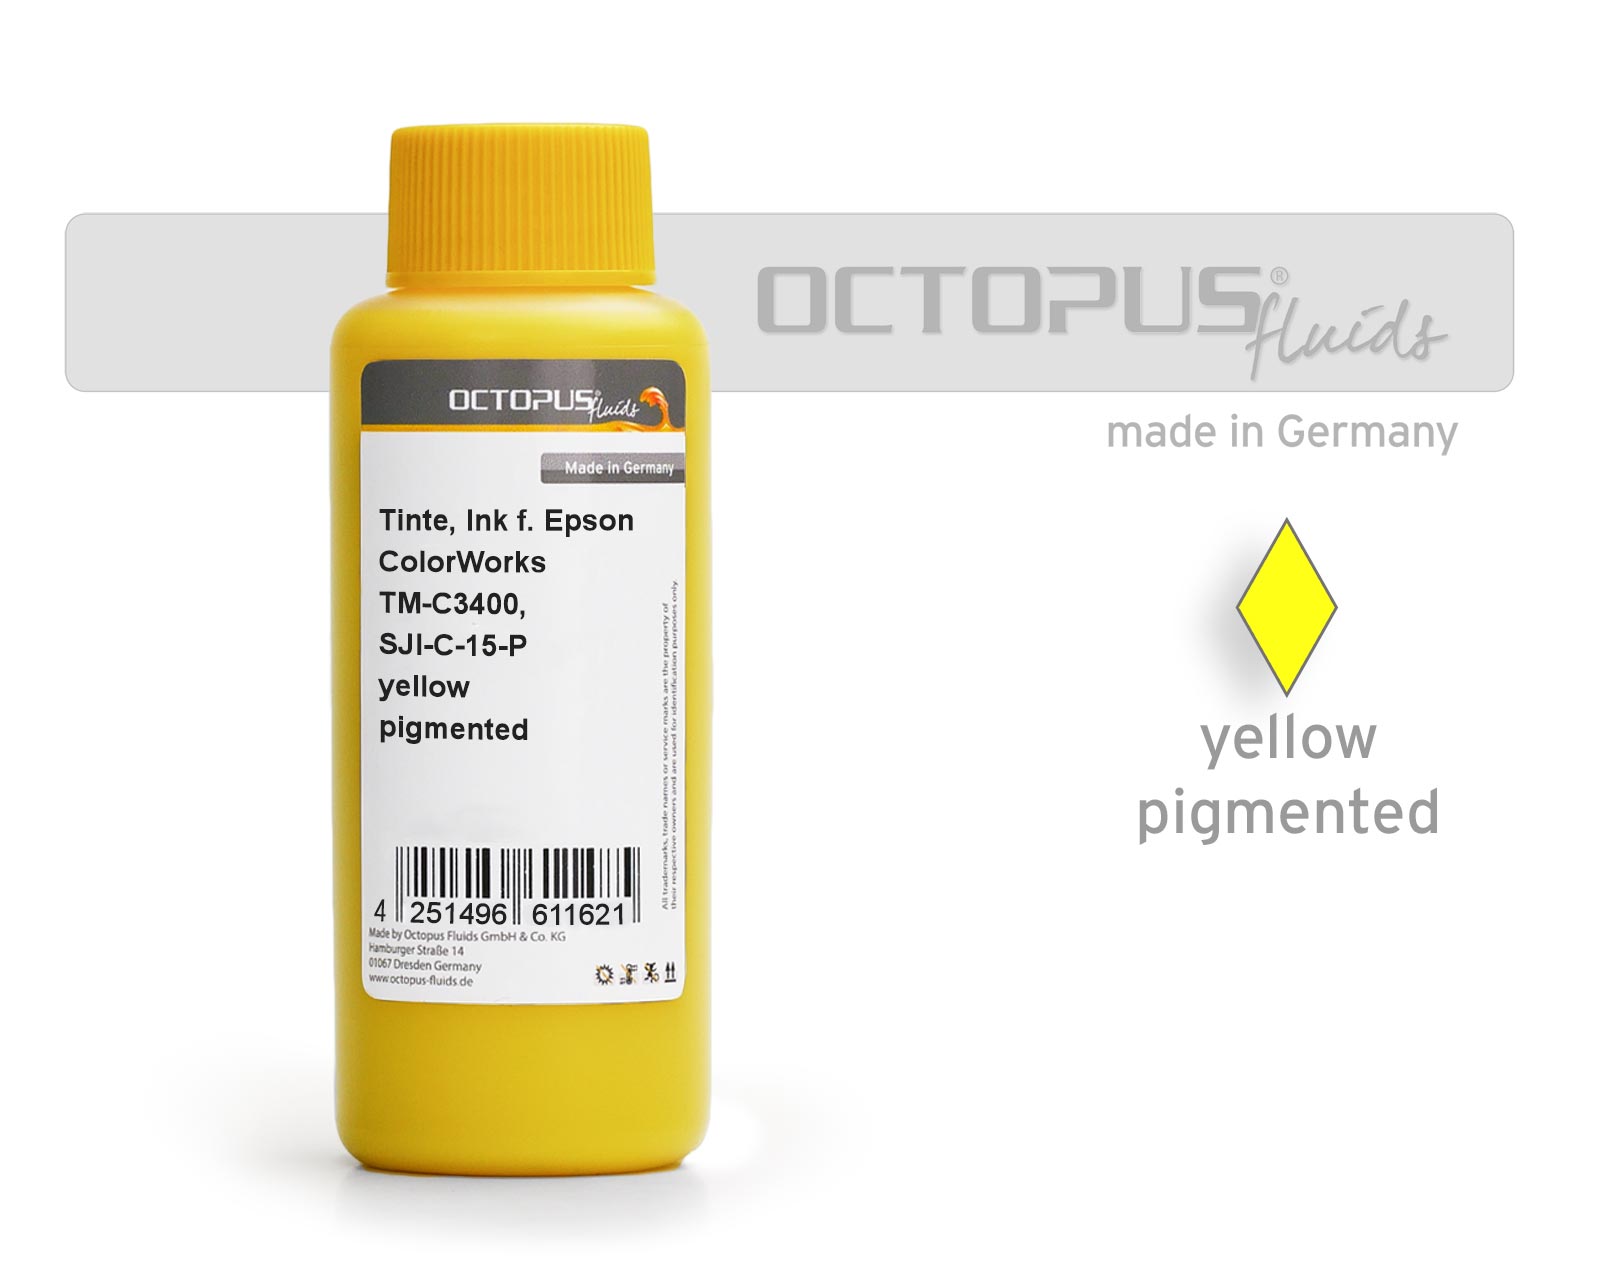 Refill ink for Epson ColorWorks TM-C3400, SJI-C-15-P yellow pigmented